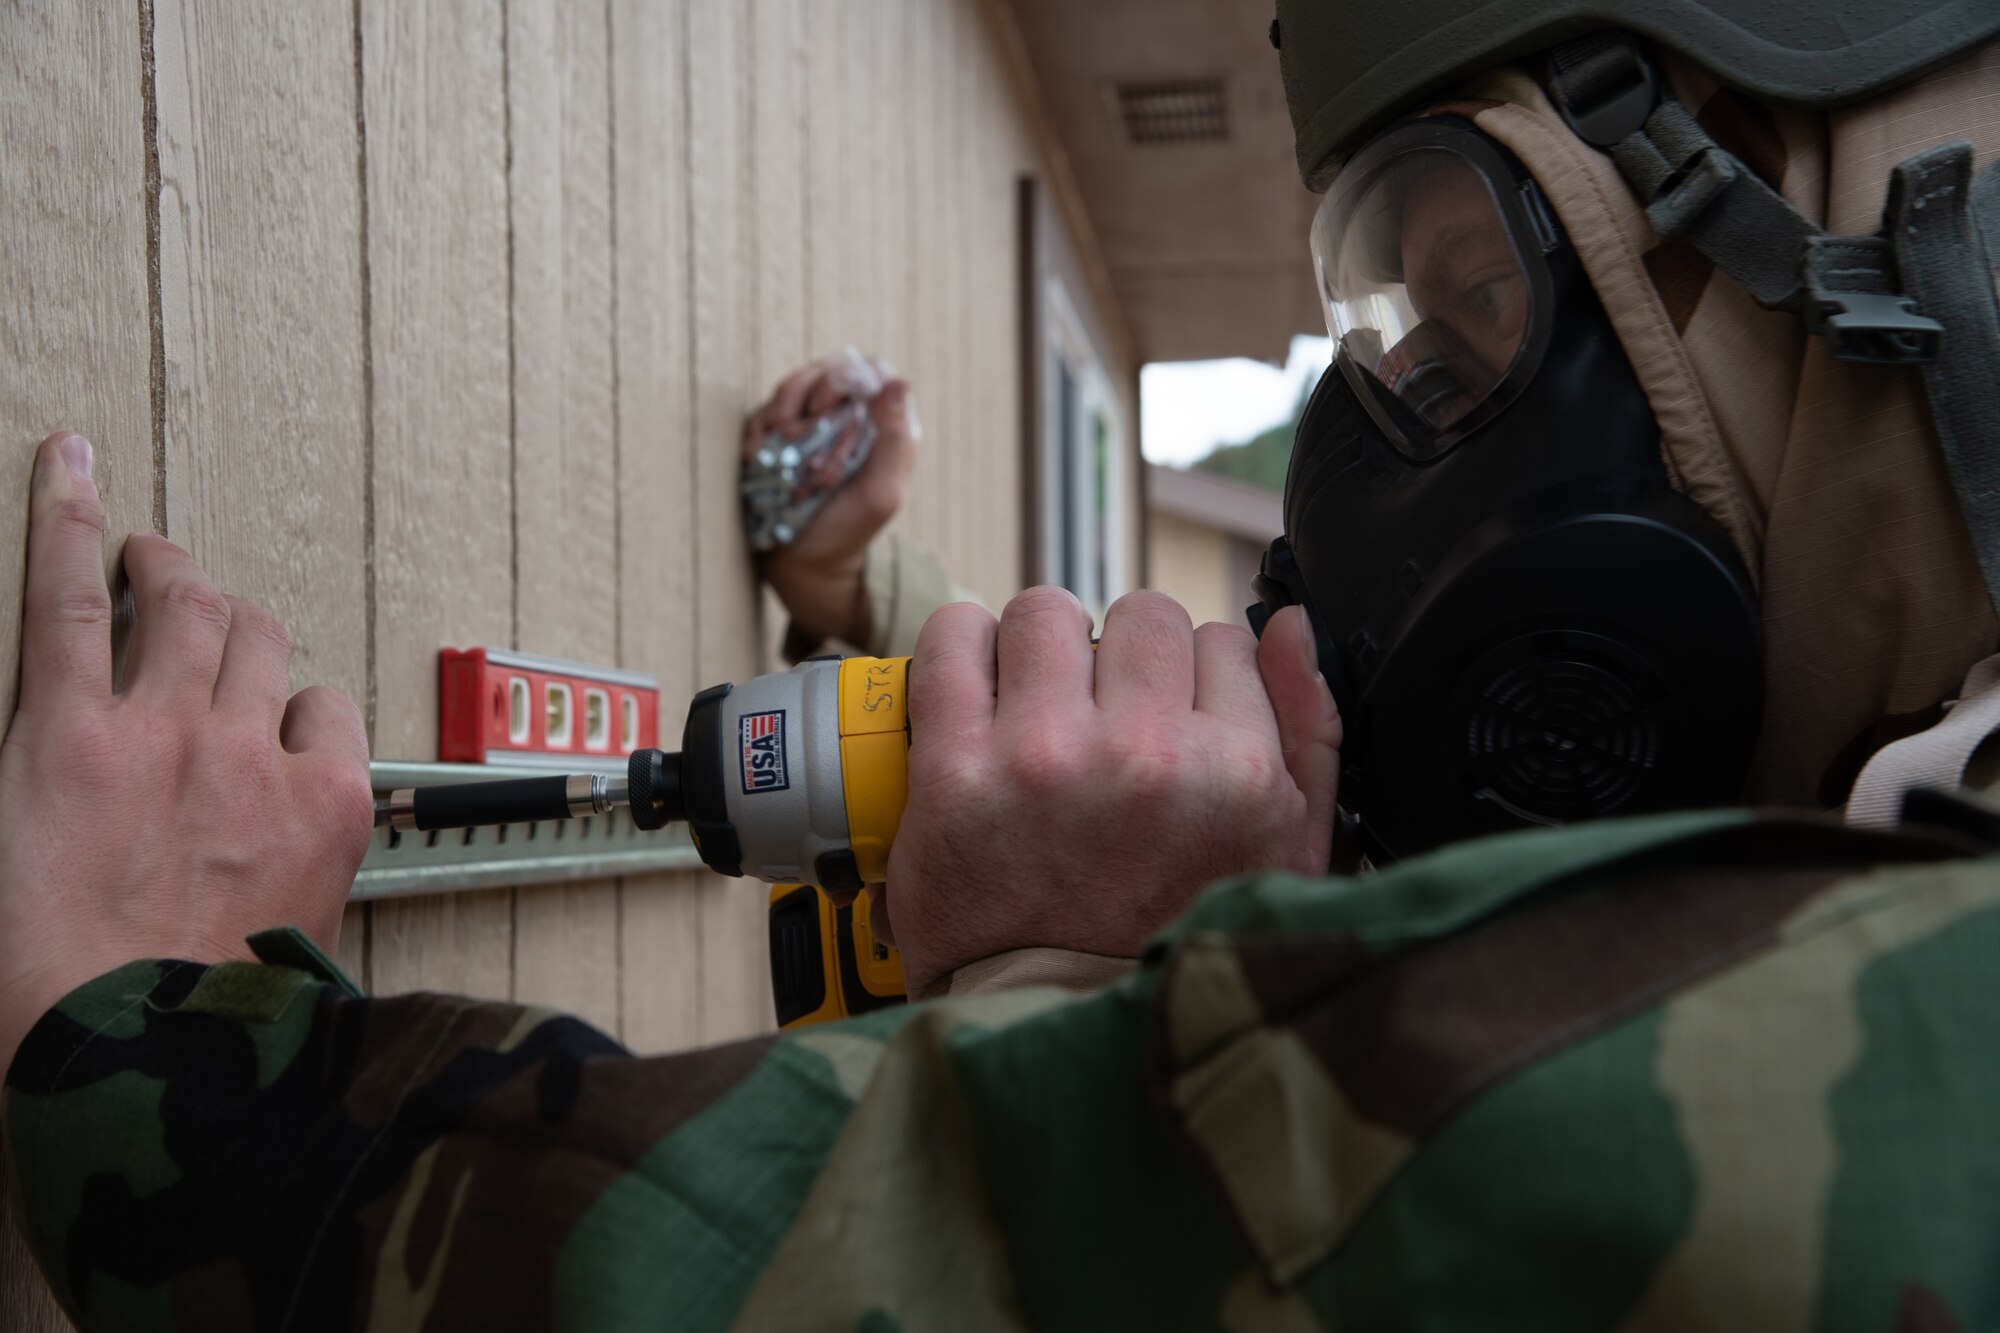 An airmen in chemical protective gear uses a power drill to mount a bracket to a wall.